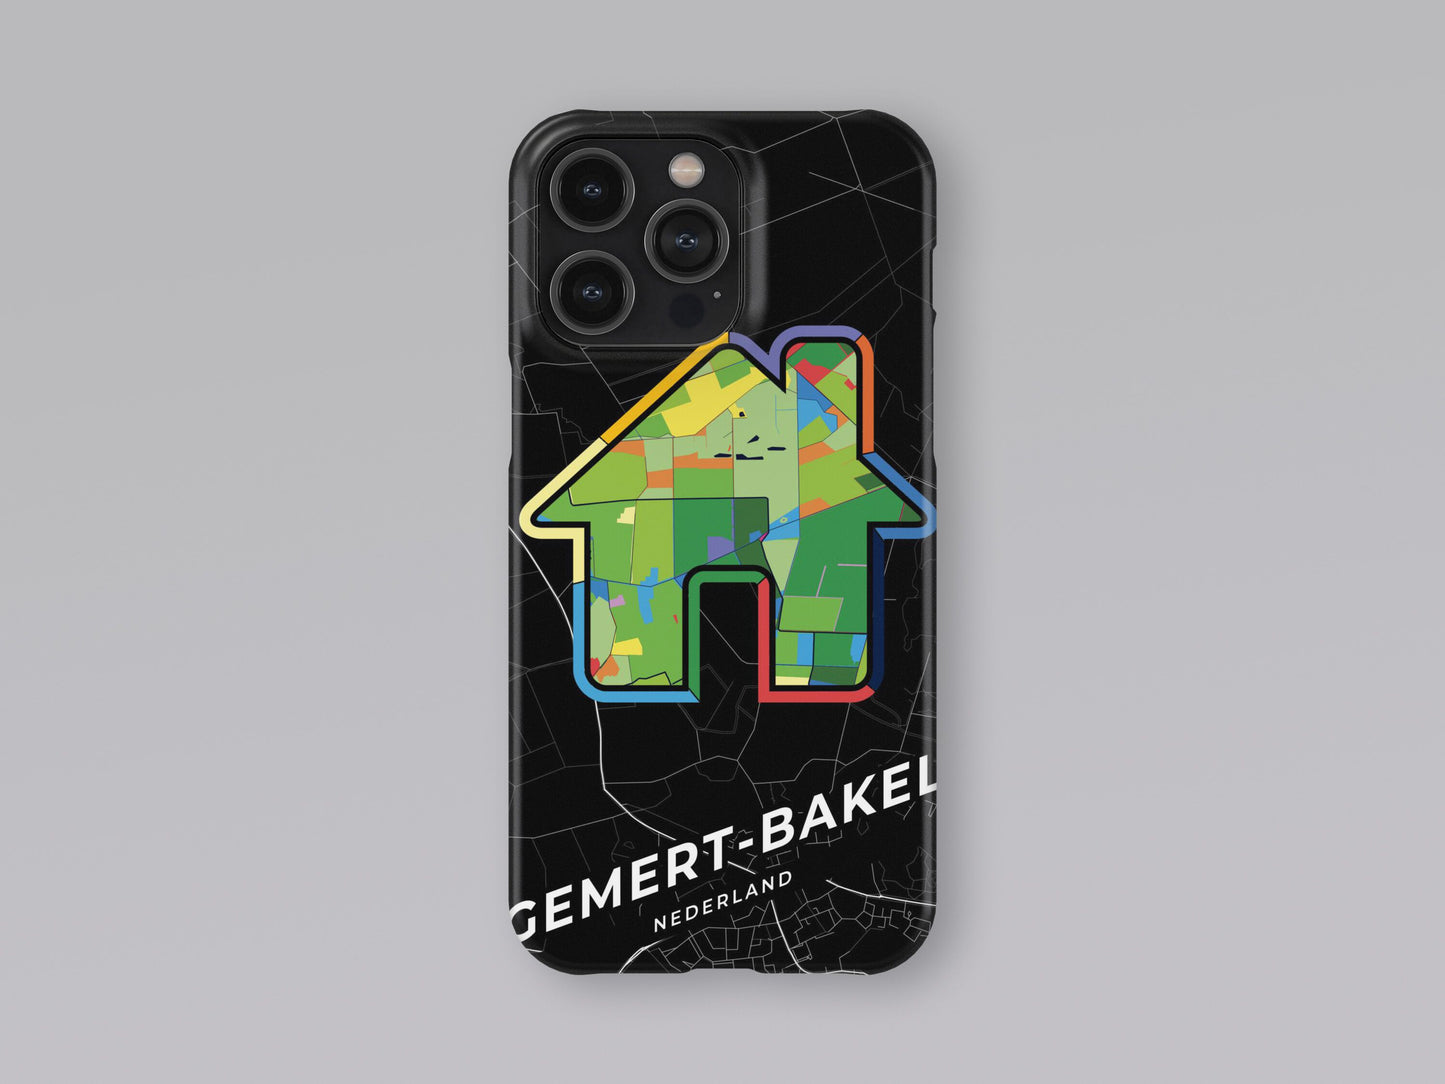 Gemert-Bakel Netherlands slim phone case with colorful icon. Birthday, wedding or housewarming gift. Couple match cases. 3